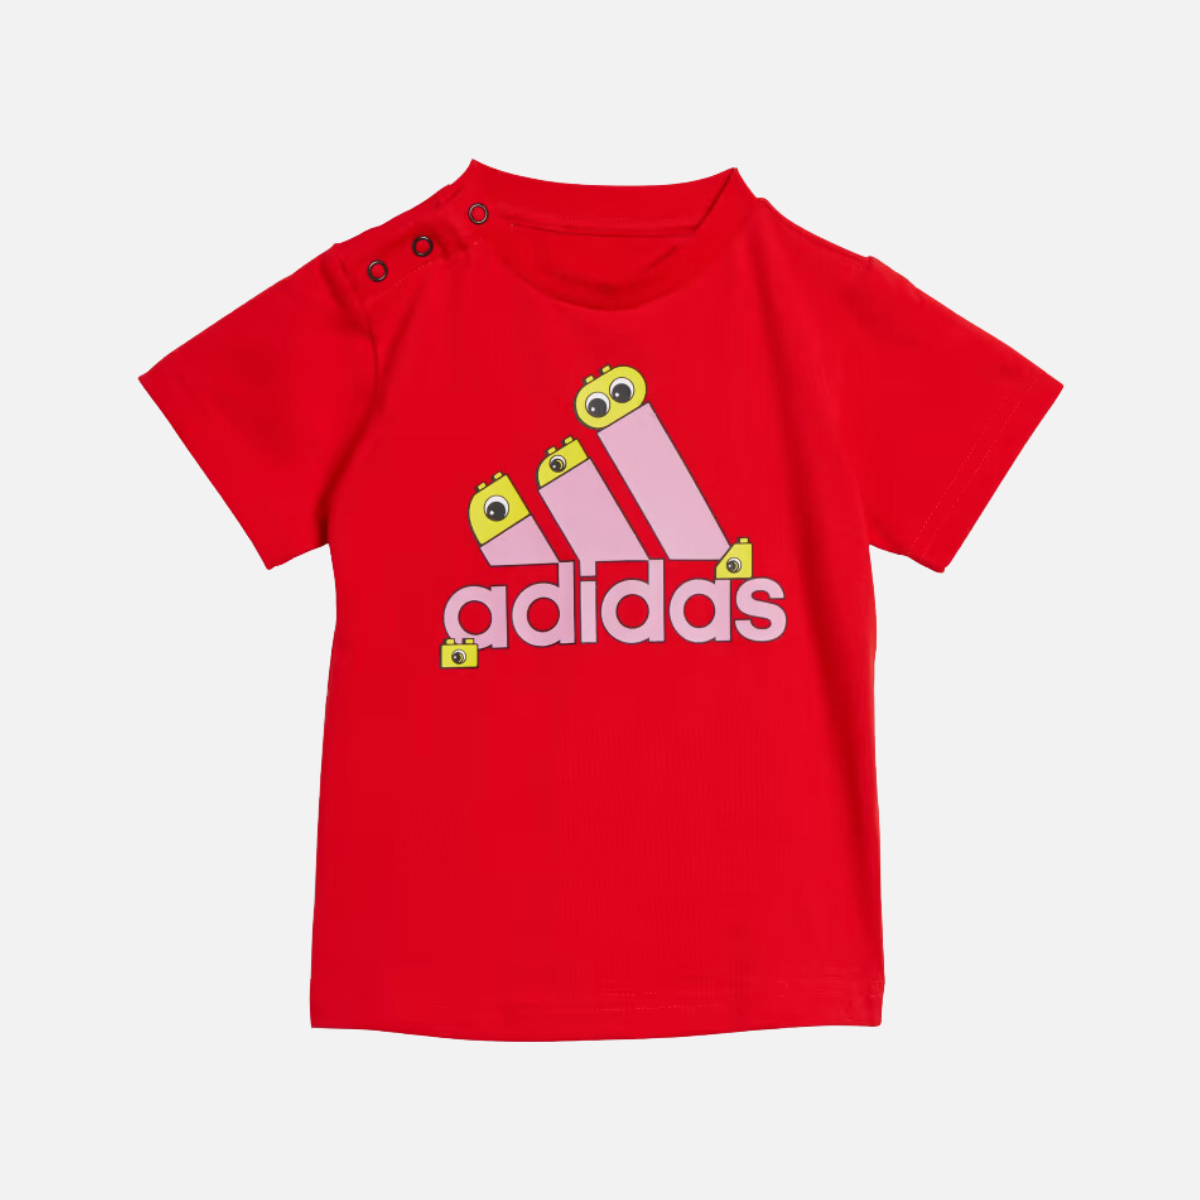 Adidas X Classic Lego Graphic Kids Unisex T-shirt (6-4 Years) -Red